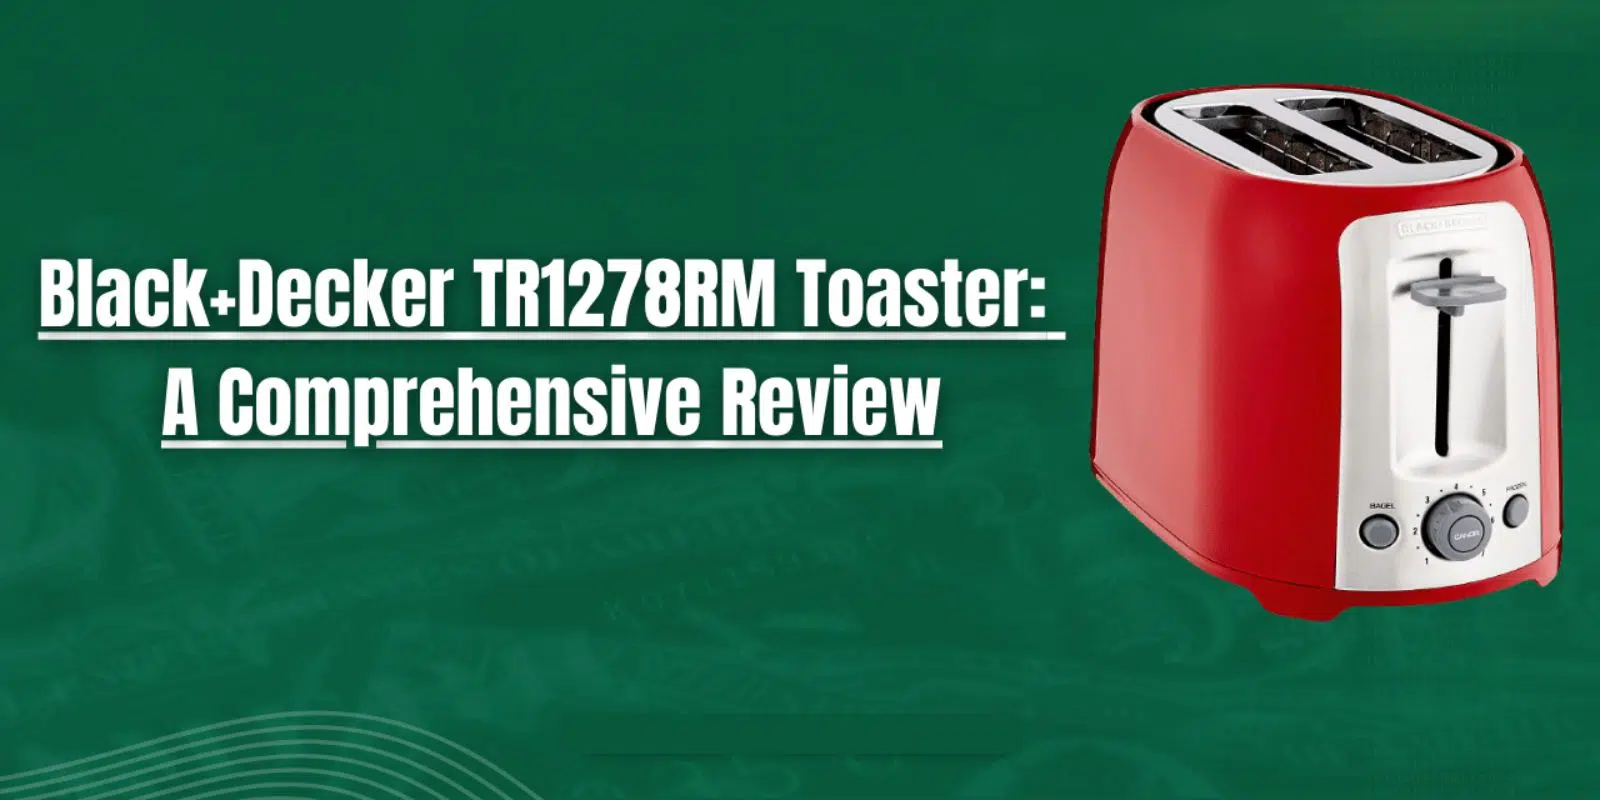 TR1278RM Toaster Review